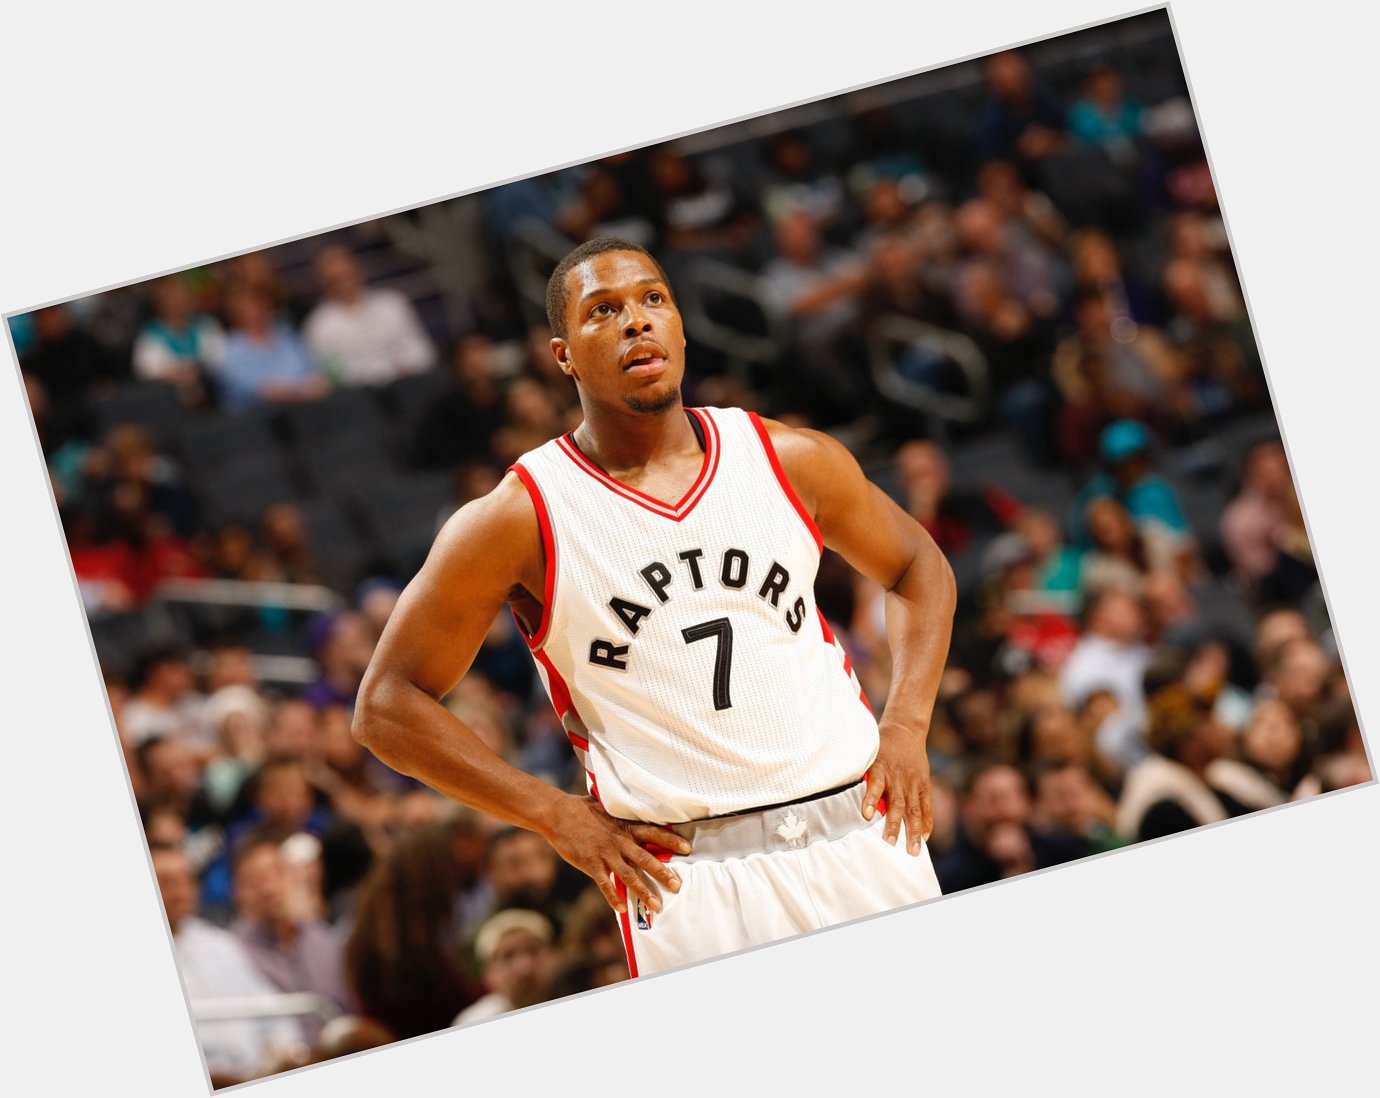 Join us in wishing Kyle Lowry of the a HAPPY 32nd BIRTHDAY!  